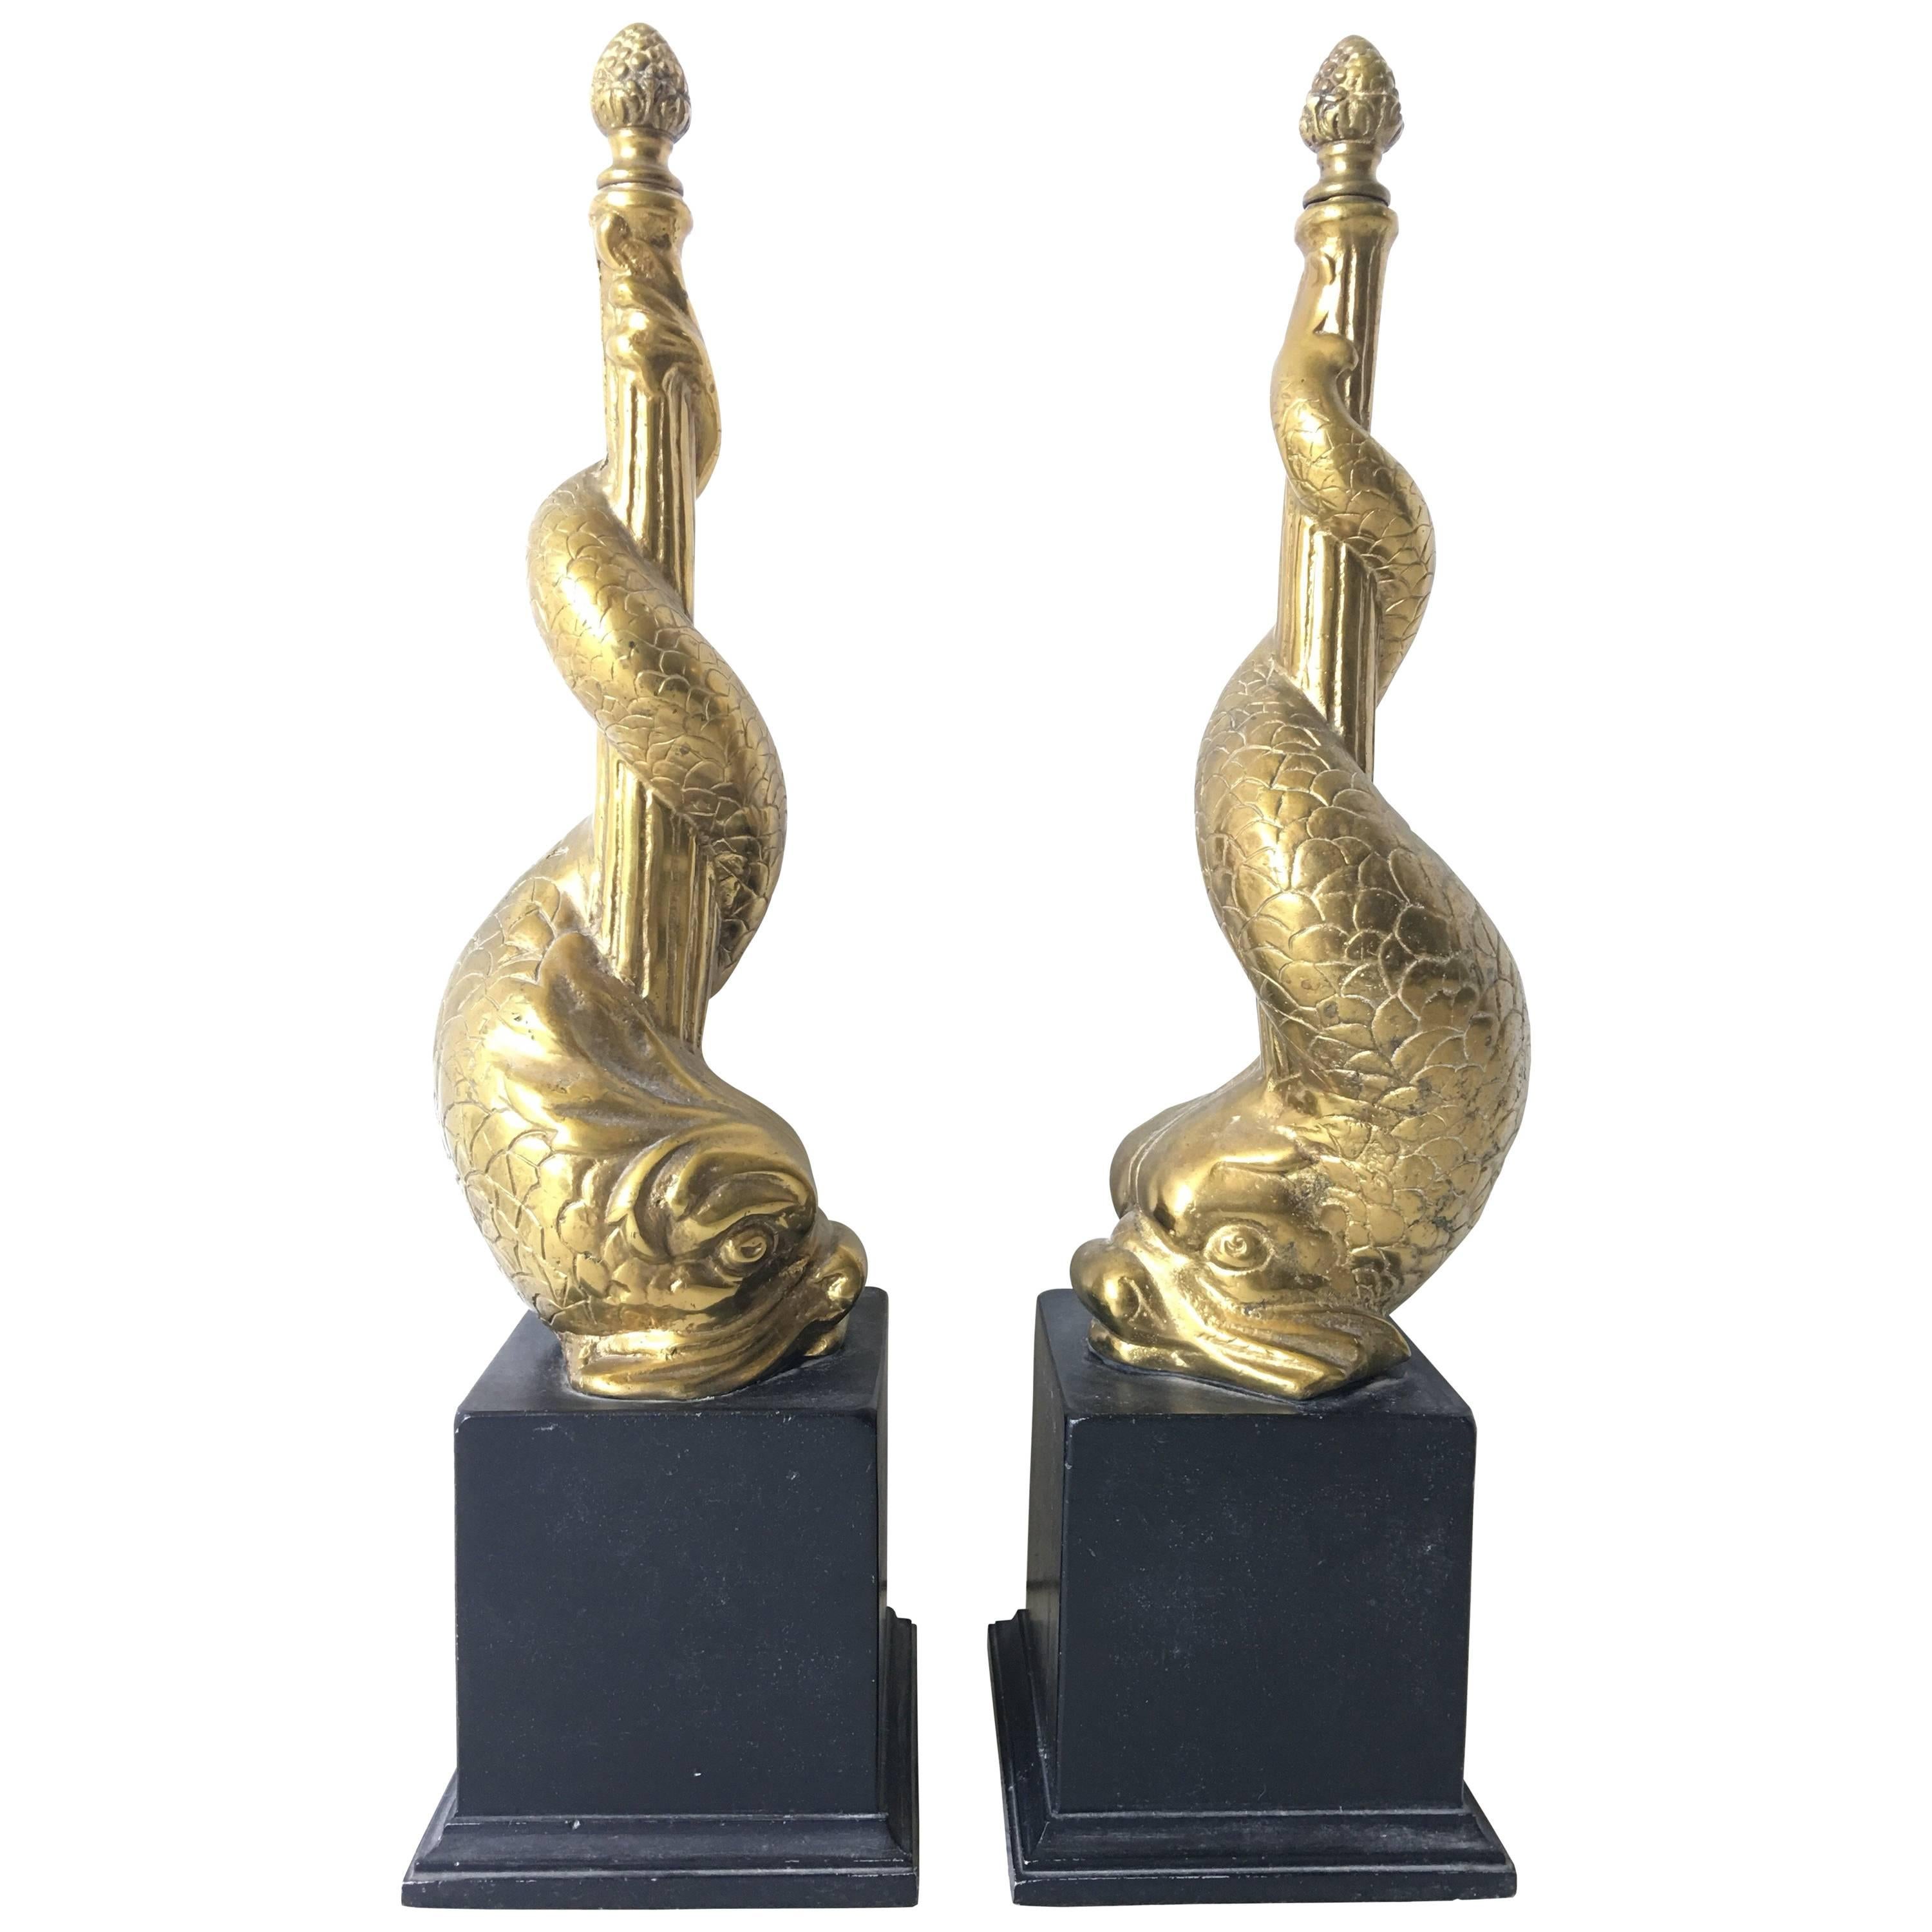  Brass Fireplace Ornament Dolphin Chenet Andirons For Sale